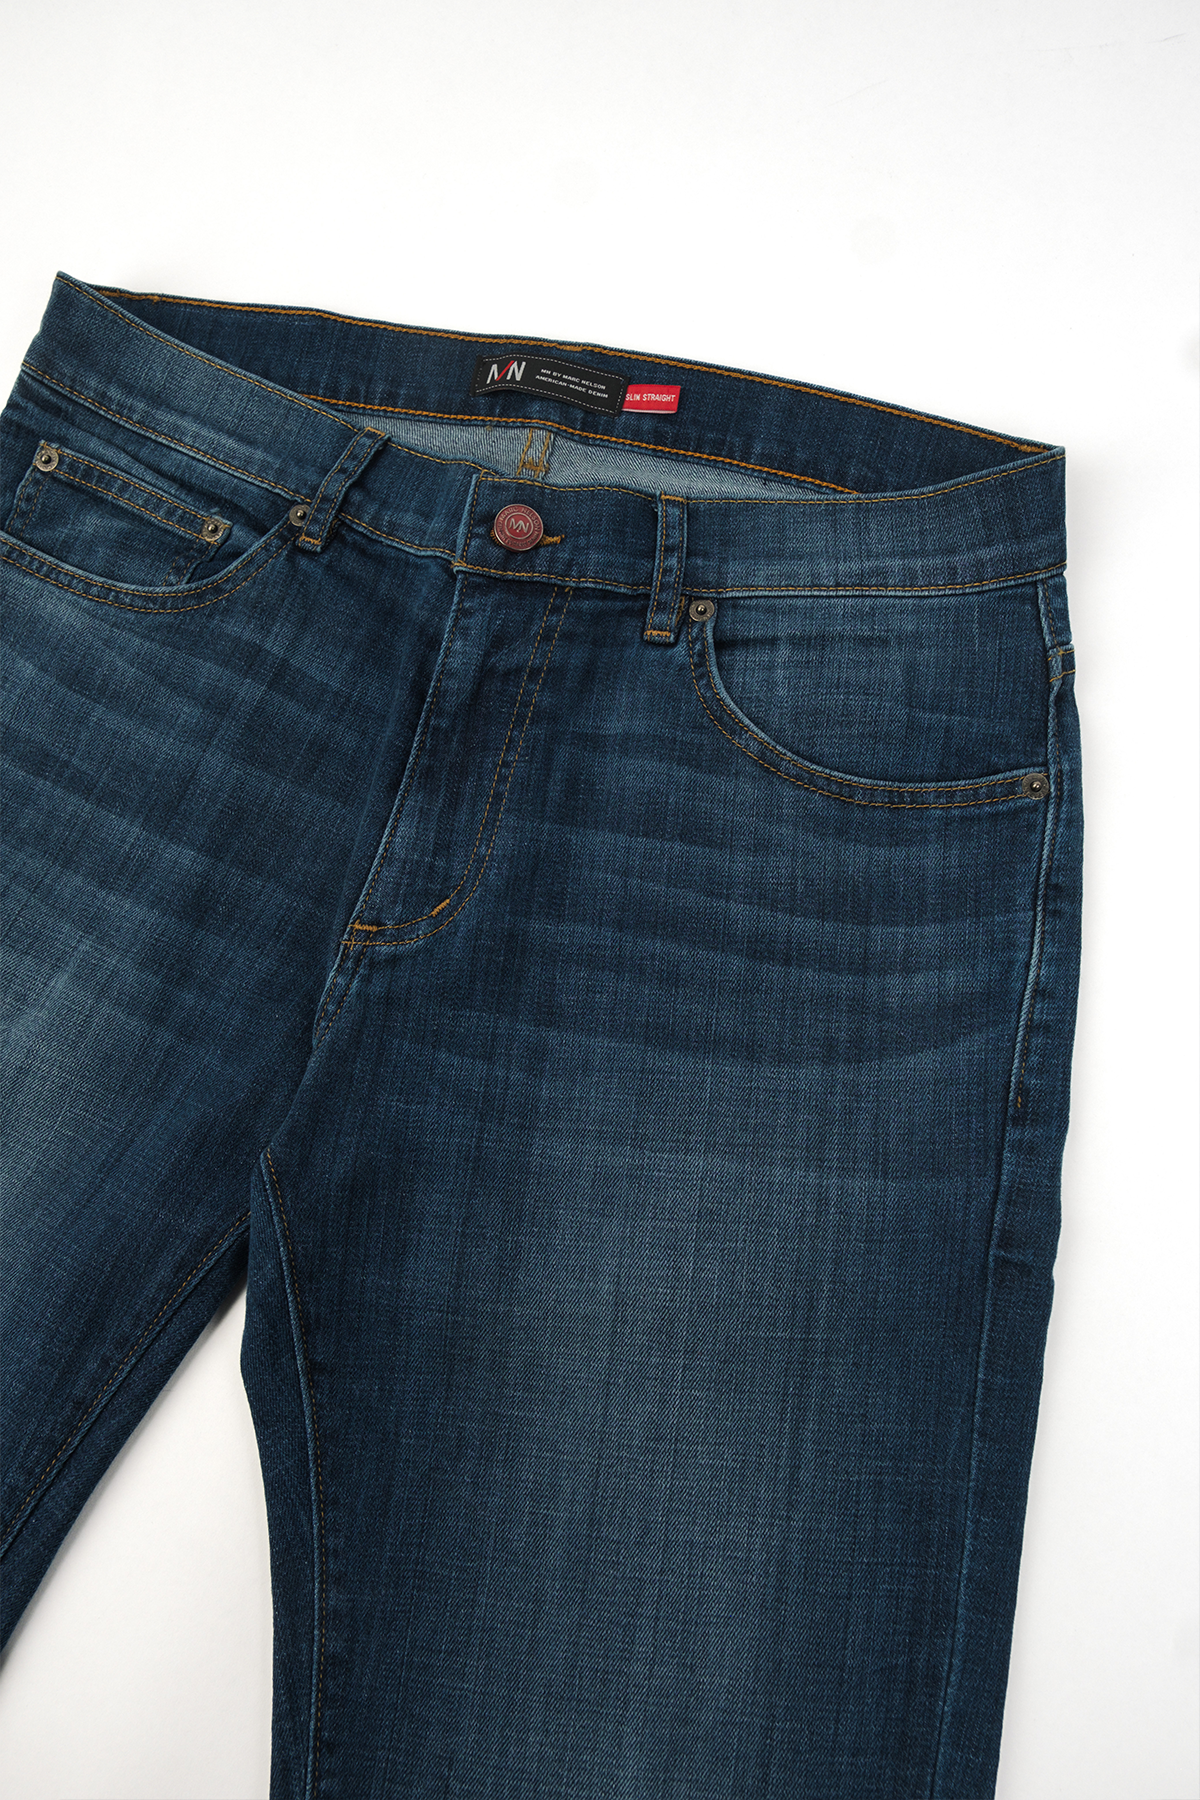 Close up photo of the Frontside of our medium wash denim from the thigh up.  